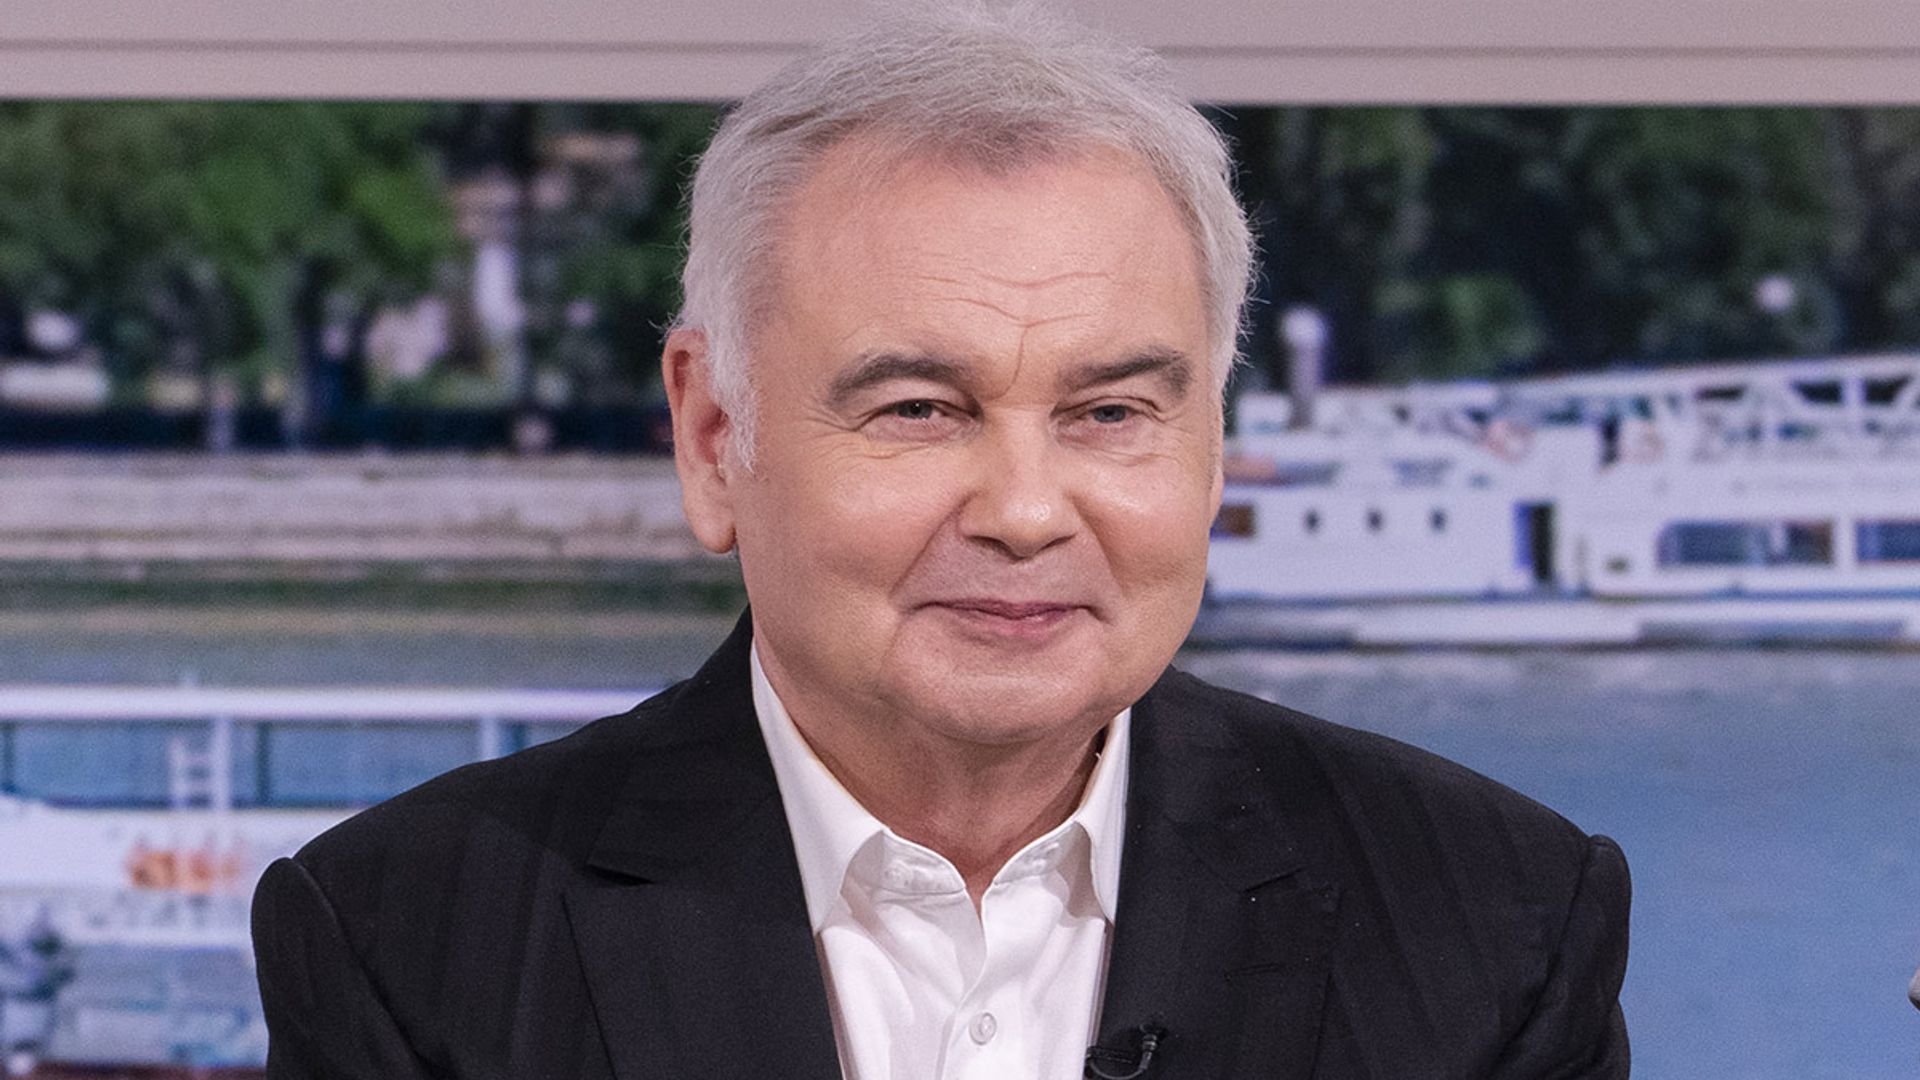 Eamonn Holmes announces exit from This Morning to join rival channel GB News